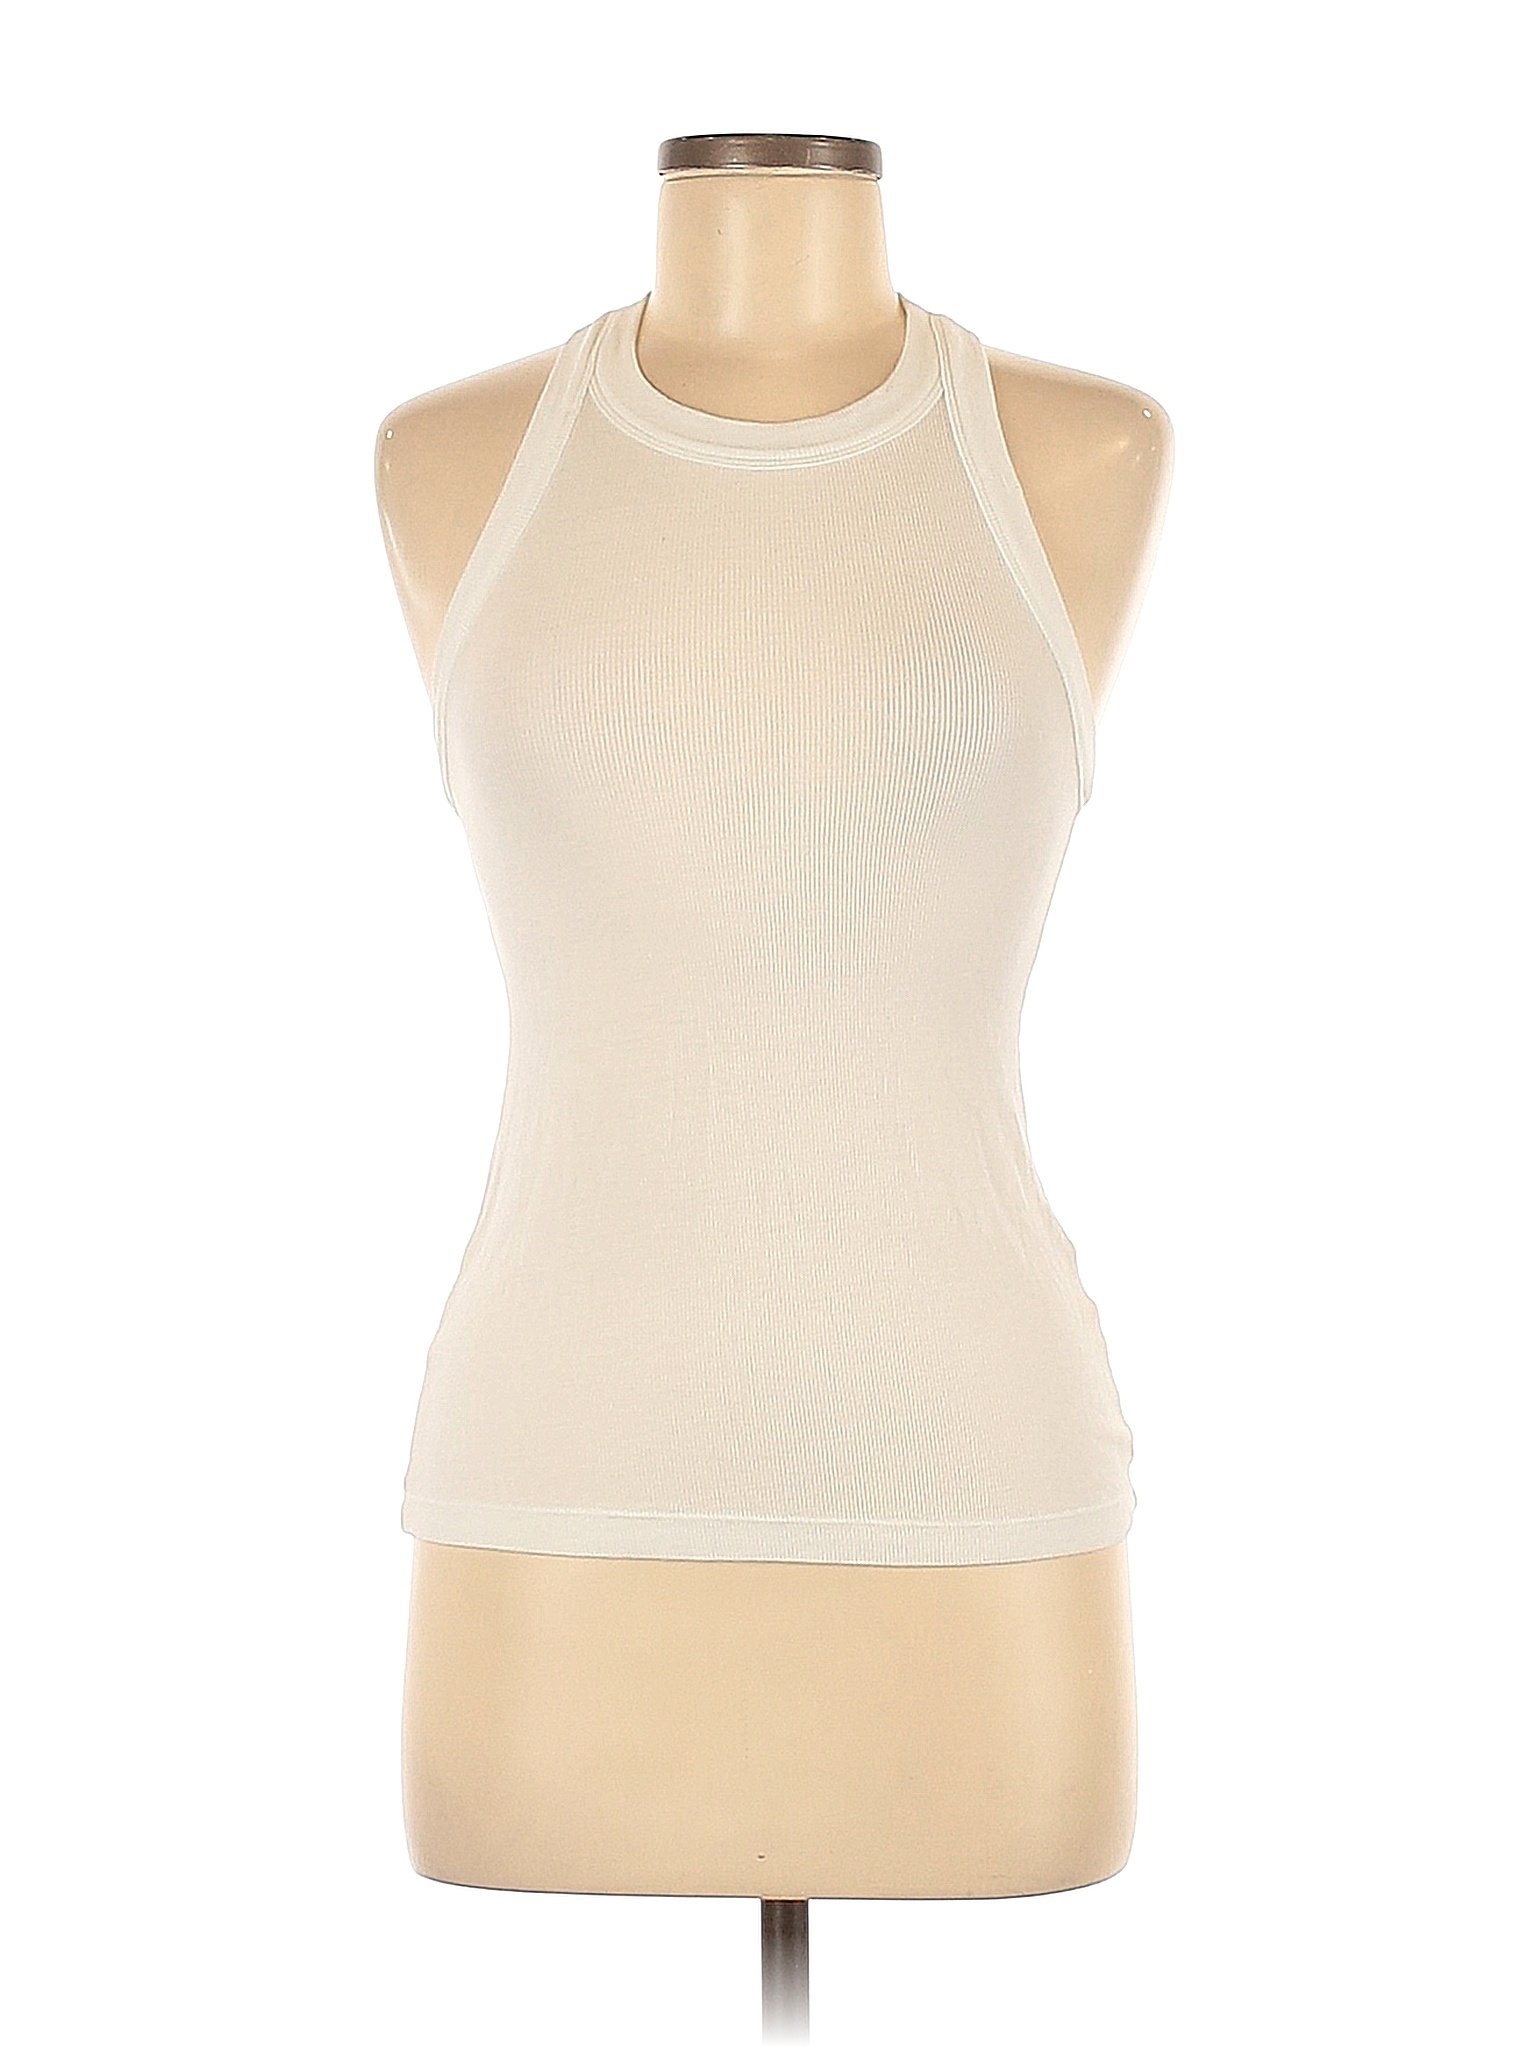 Fabletics Solid Tan White Active Tank Size XS - 71% off | thredUP